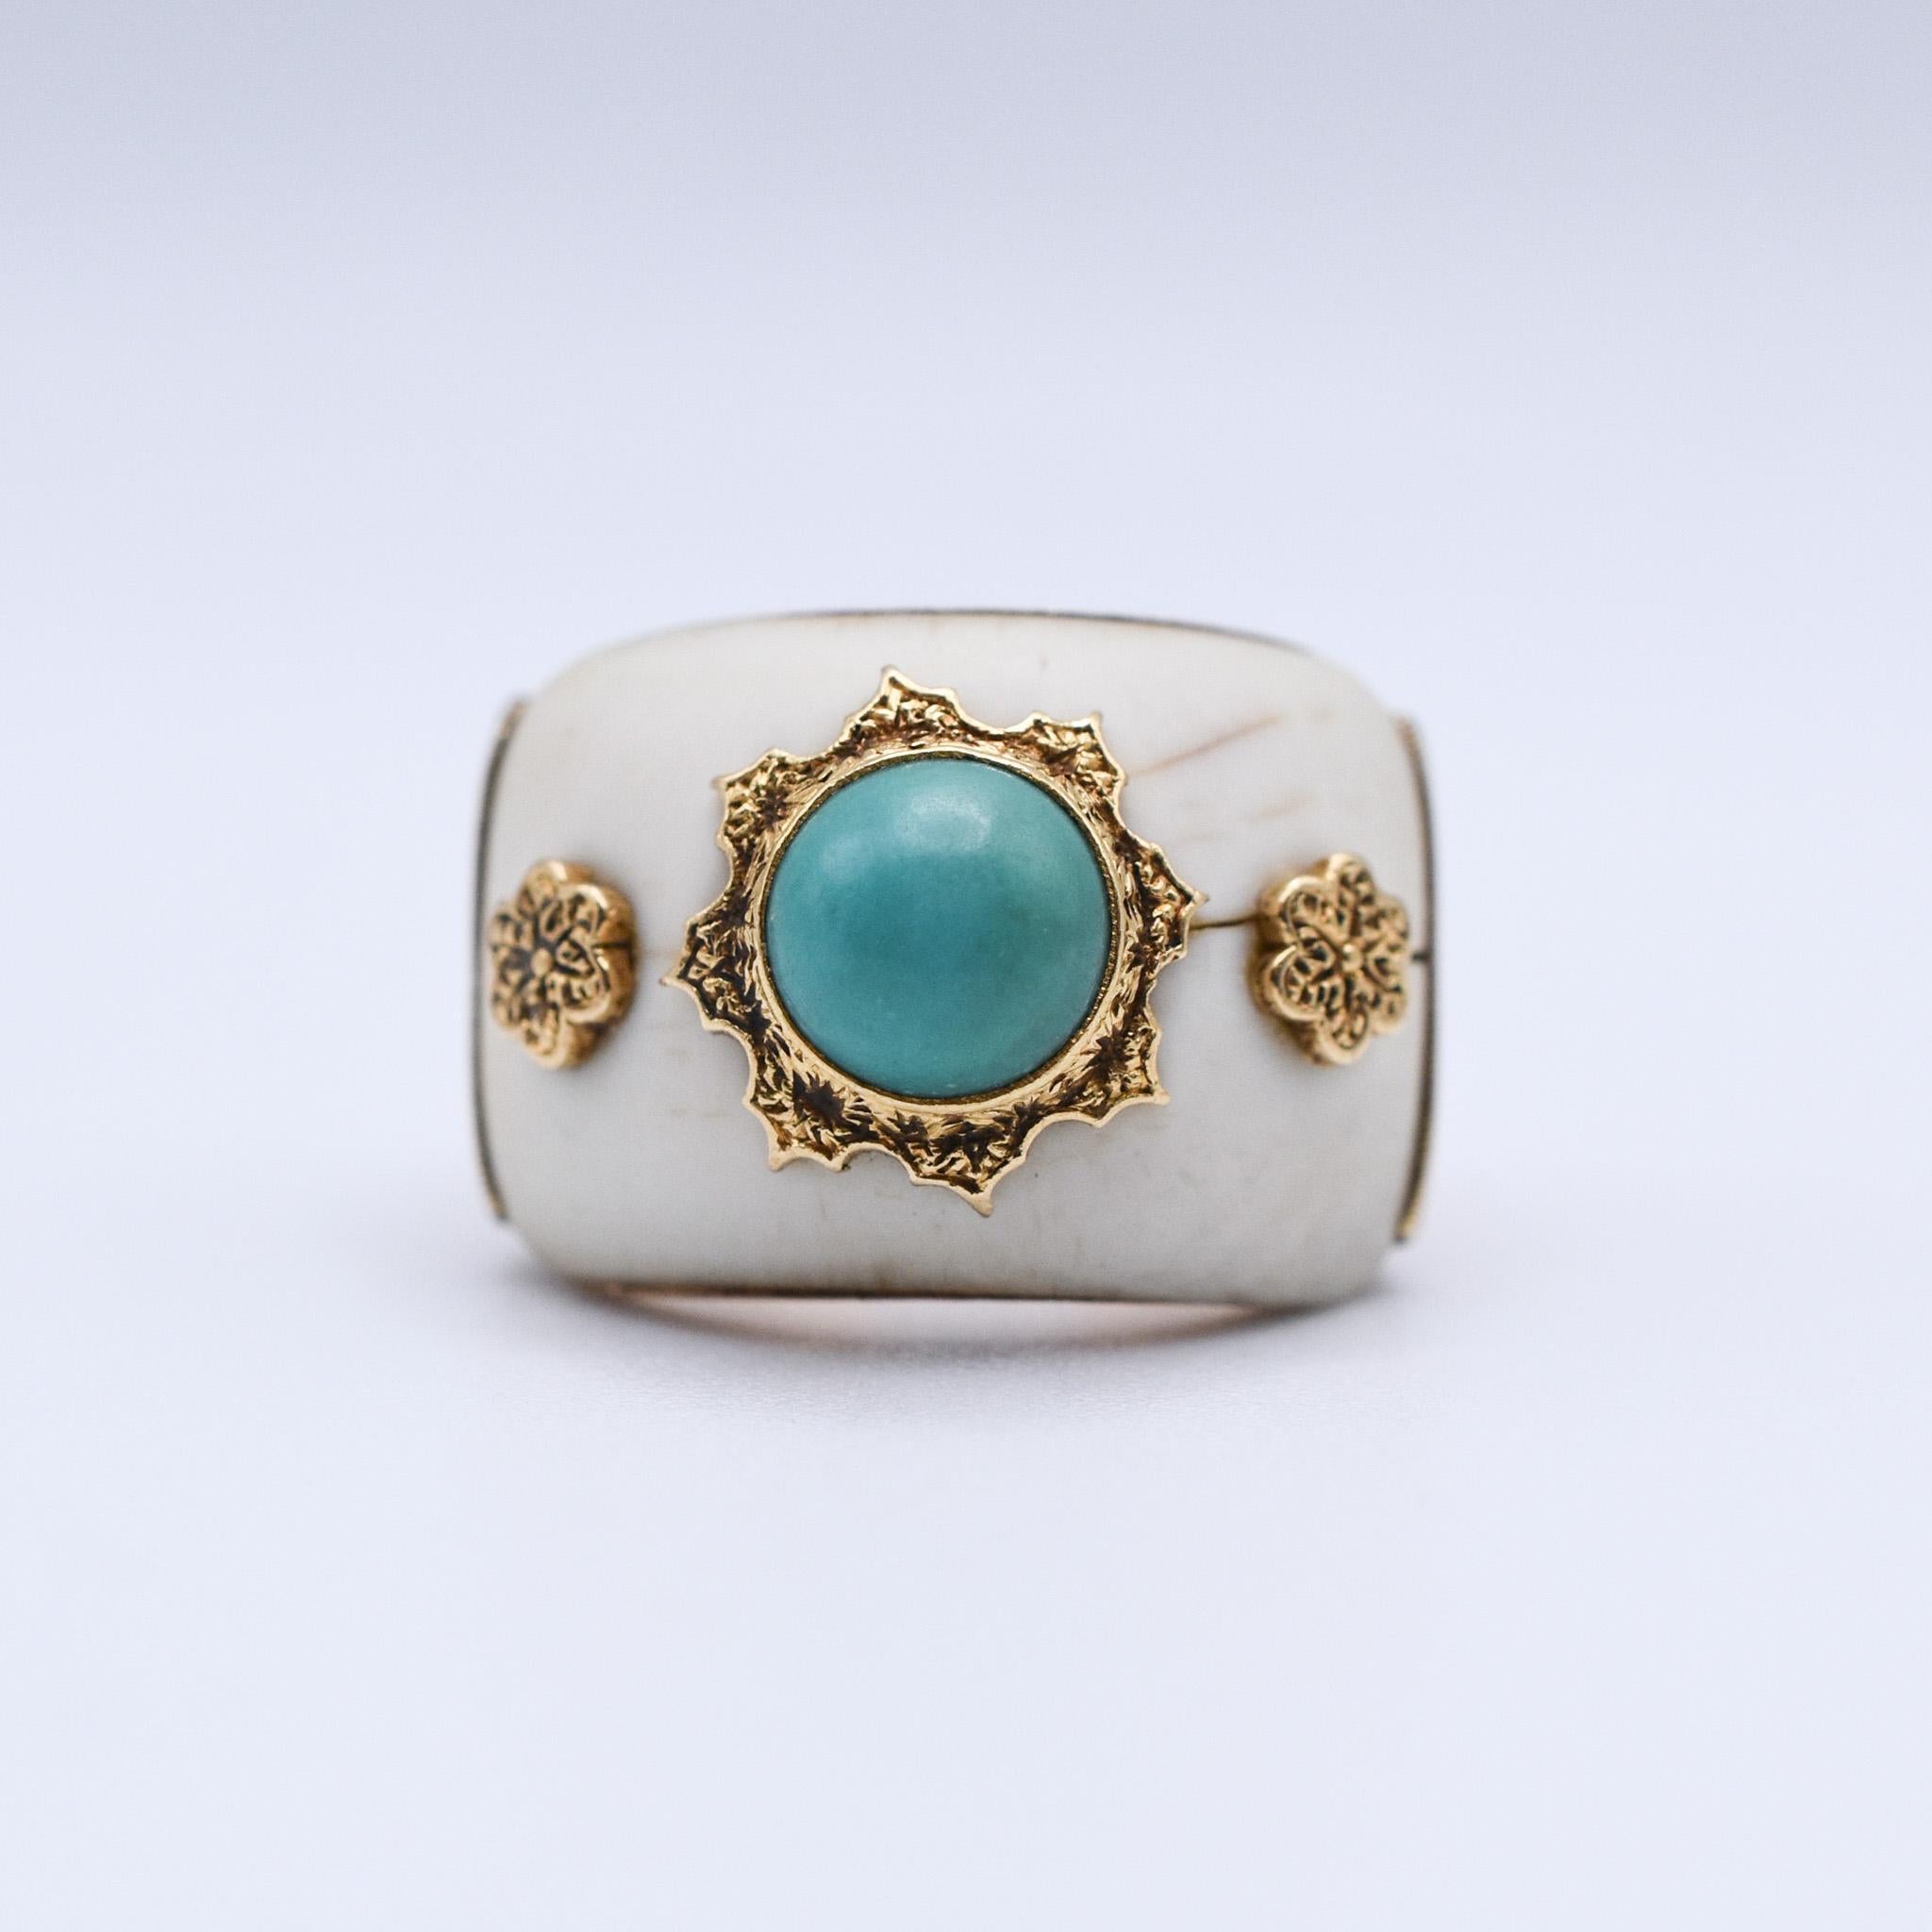 A refined Buccellati Ivory and Turquoise Ring mounted on 18k Yellow Gold.
 Made in Italy, circa 1960.

Ring size: US 4.5 - adjustable.

